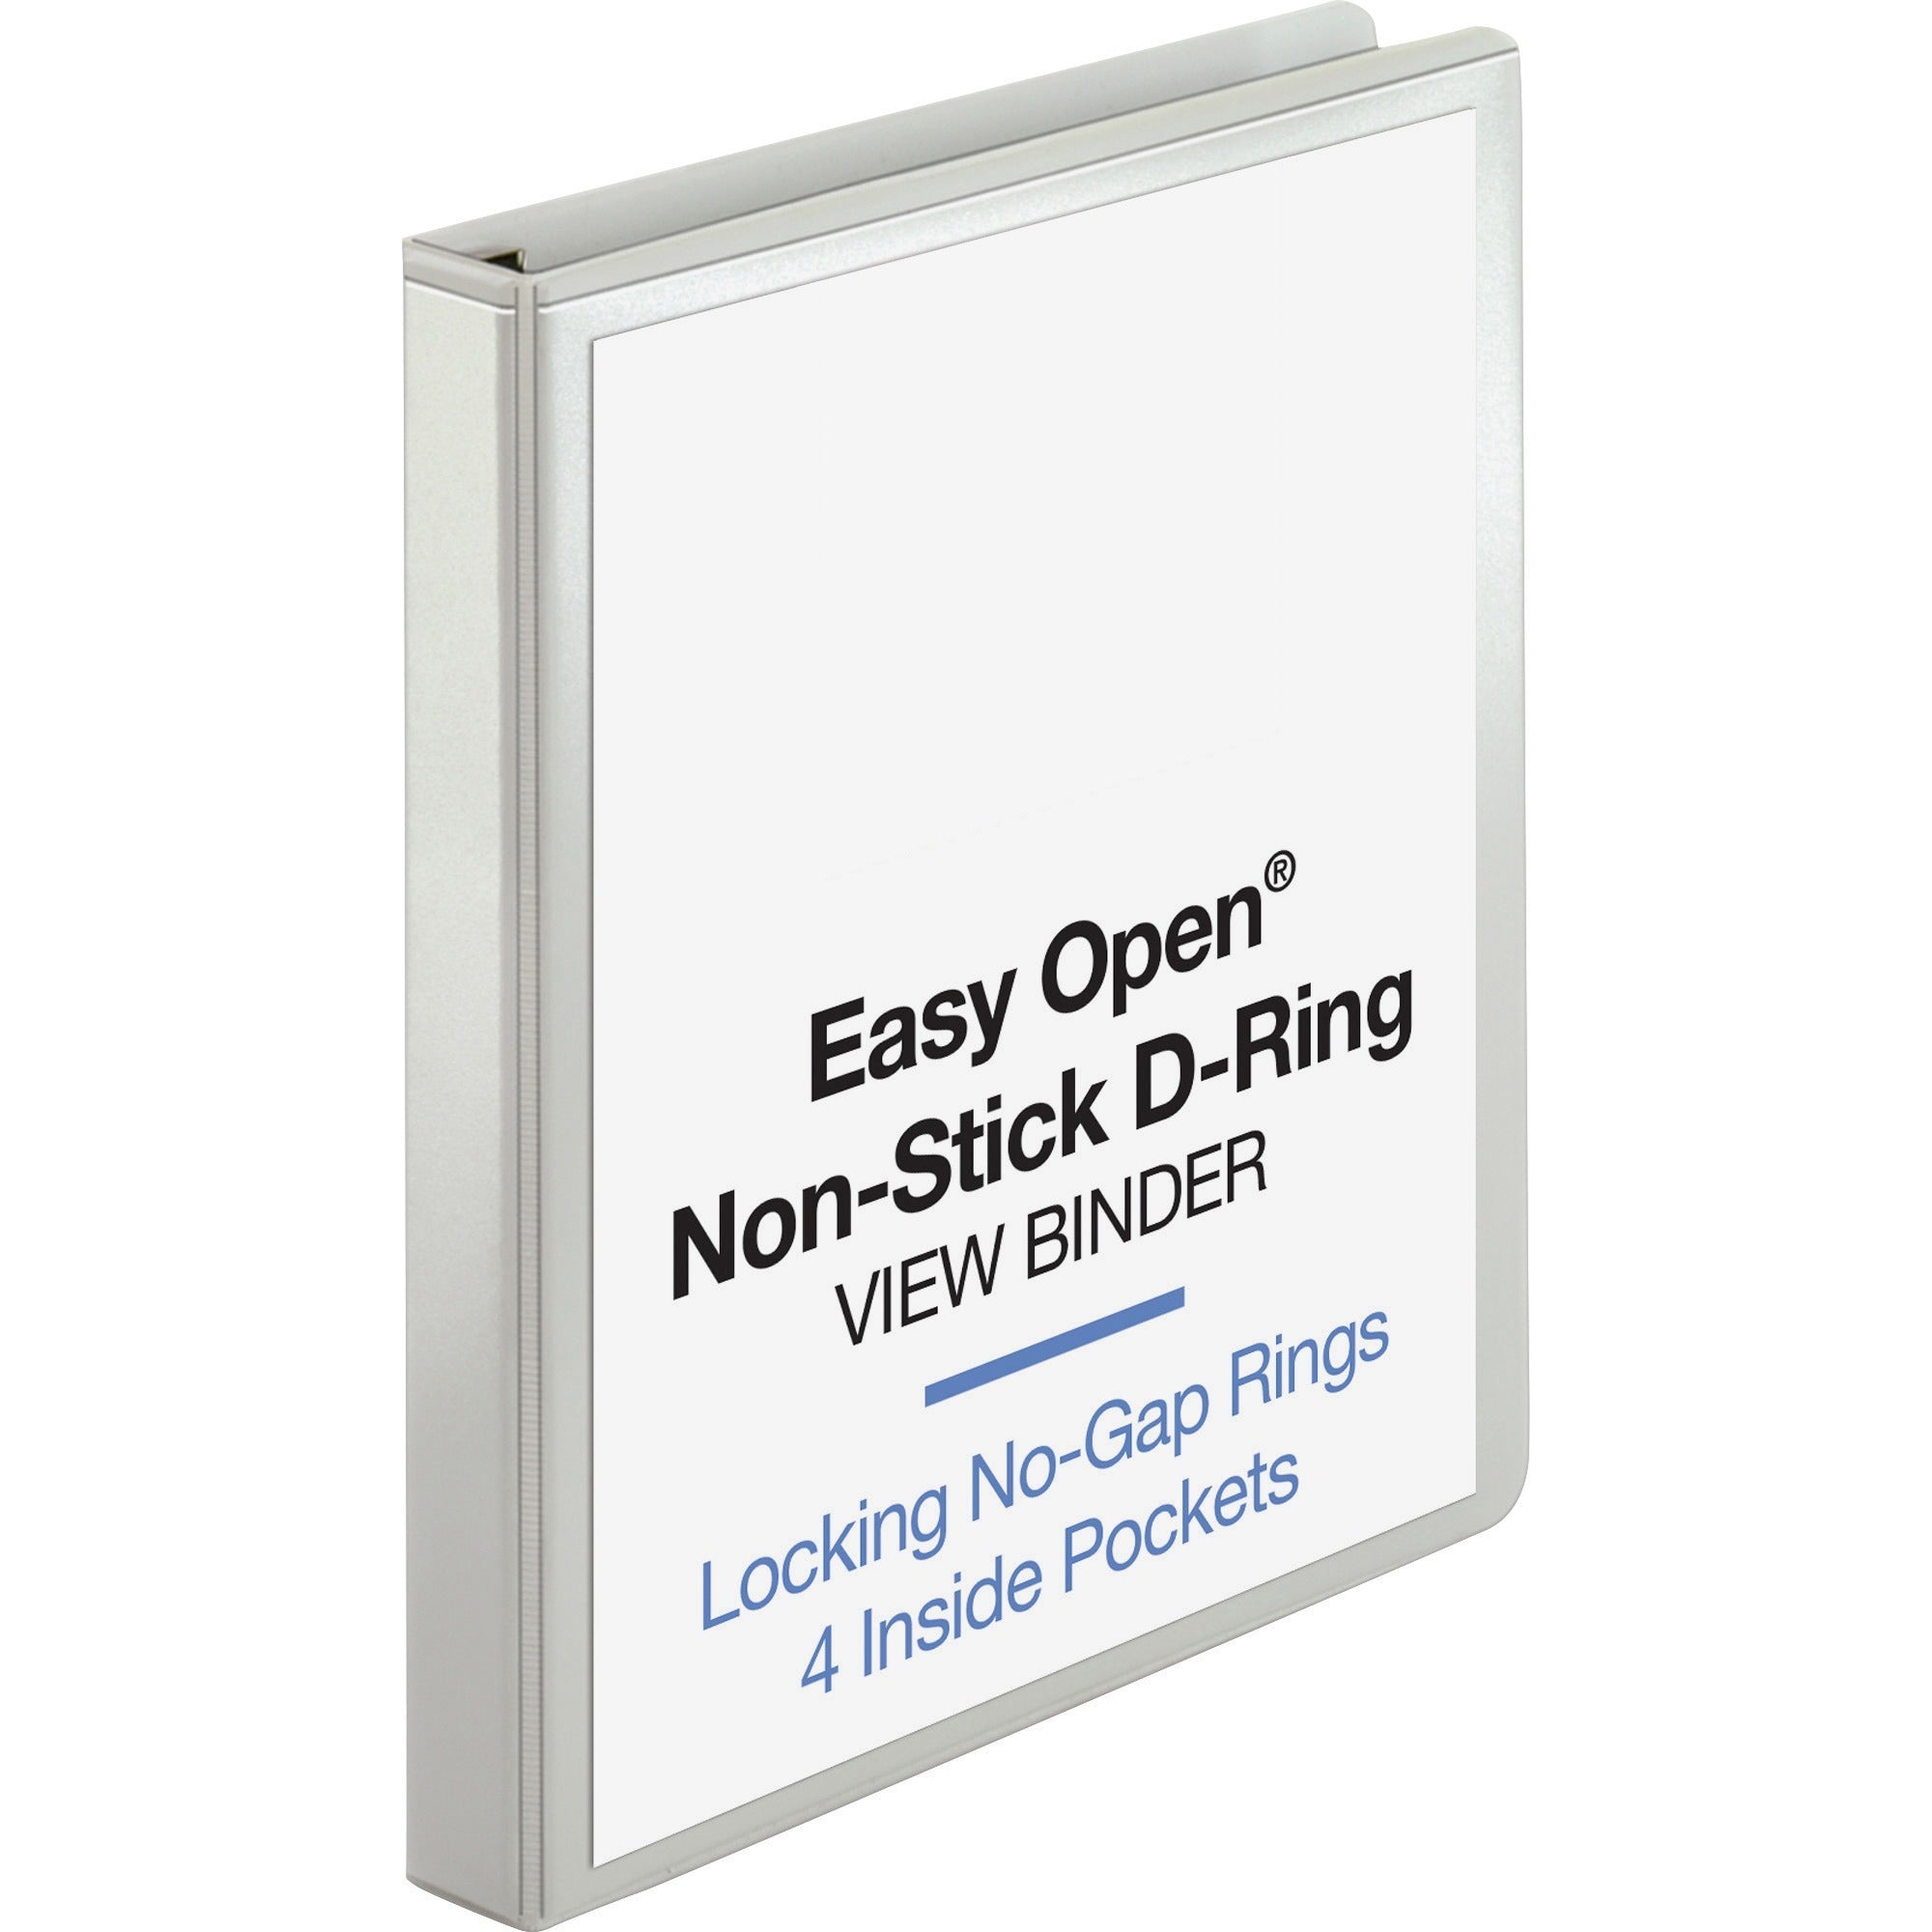 business-source-locking-d-ring-view-binder-1-binder-capacity-letter-8-1-2-x-11-sheet-size-200-sheet-capacity-d-ring-fasteners-4-inside-front-&-back-pockets-polypropylene-chipboard-white-recycled-non-glare-acid-free-expos_bsn26955 - 1